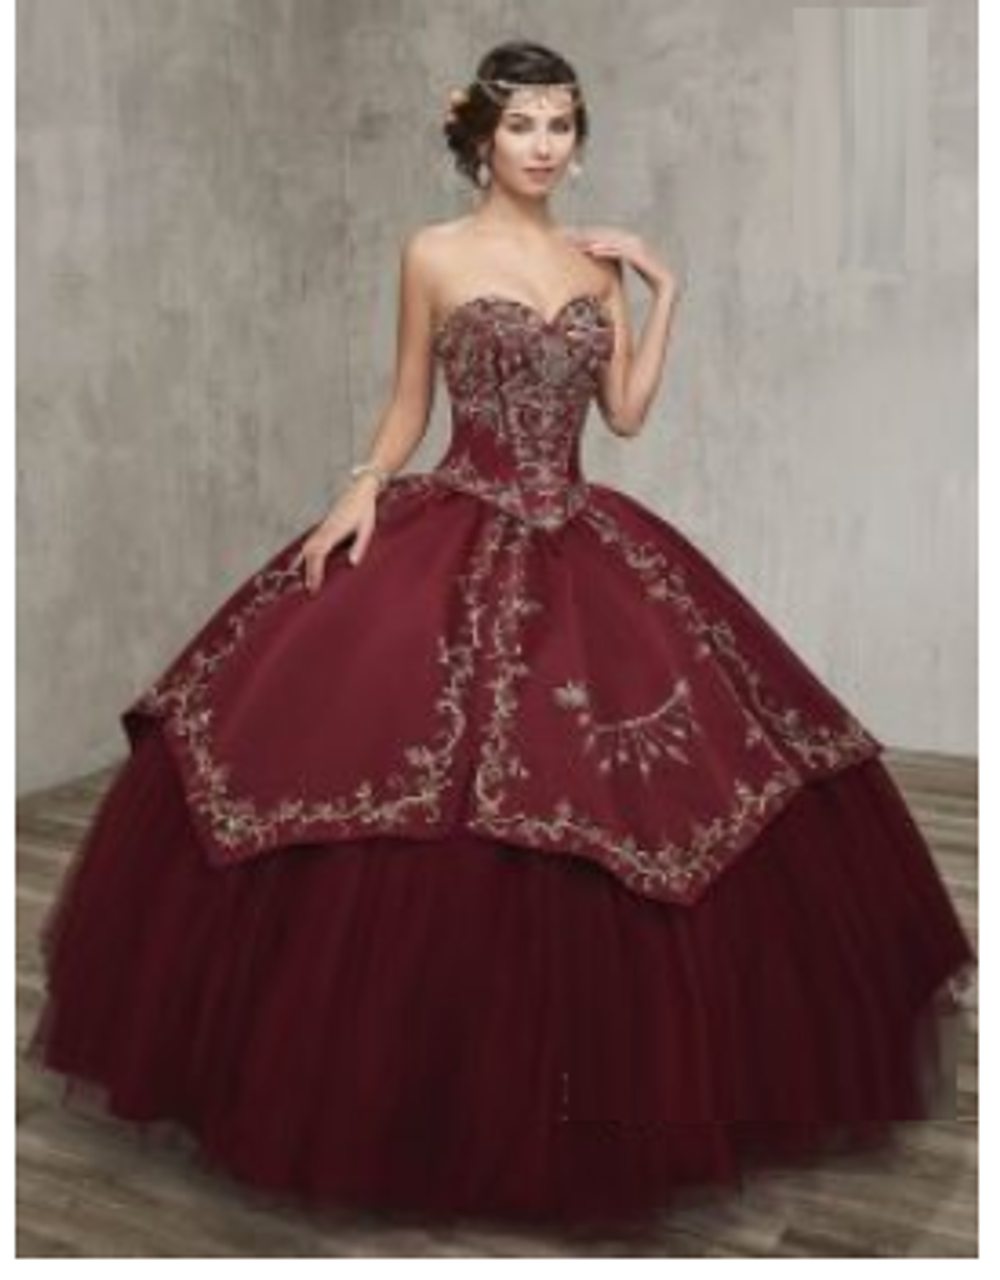 Gold Lace Appliqued Burgundy African American Prom Dress - Lunss